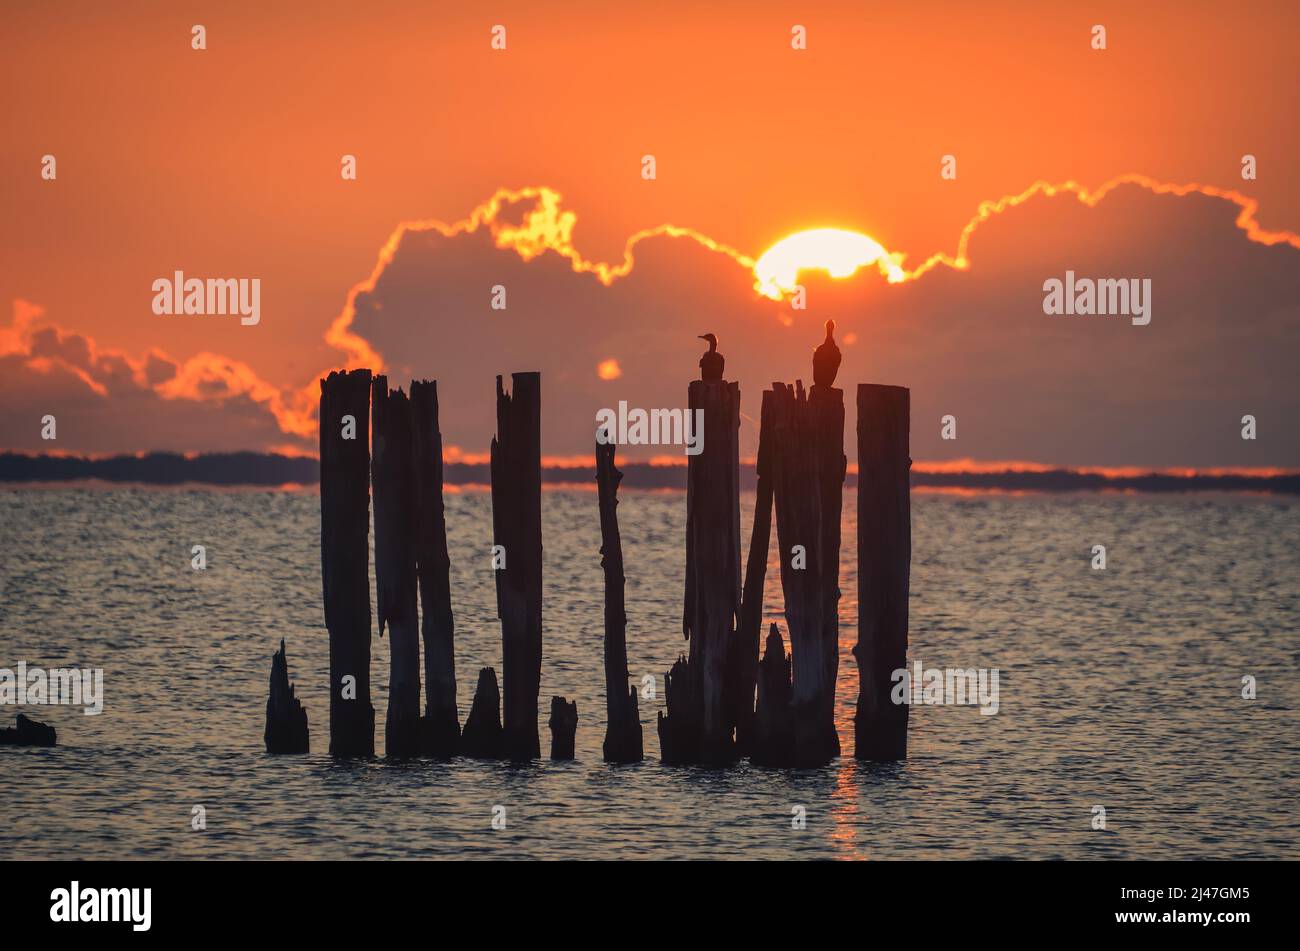 Beautiful evening seaside view. Wooden boles at the Polish seaside with the evening sun in the background. Stock Photo